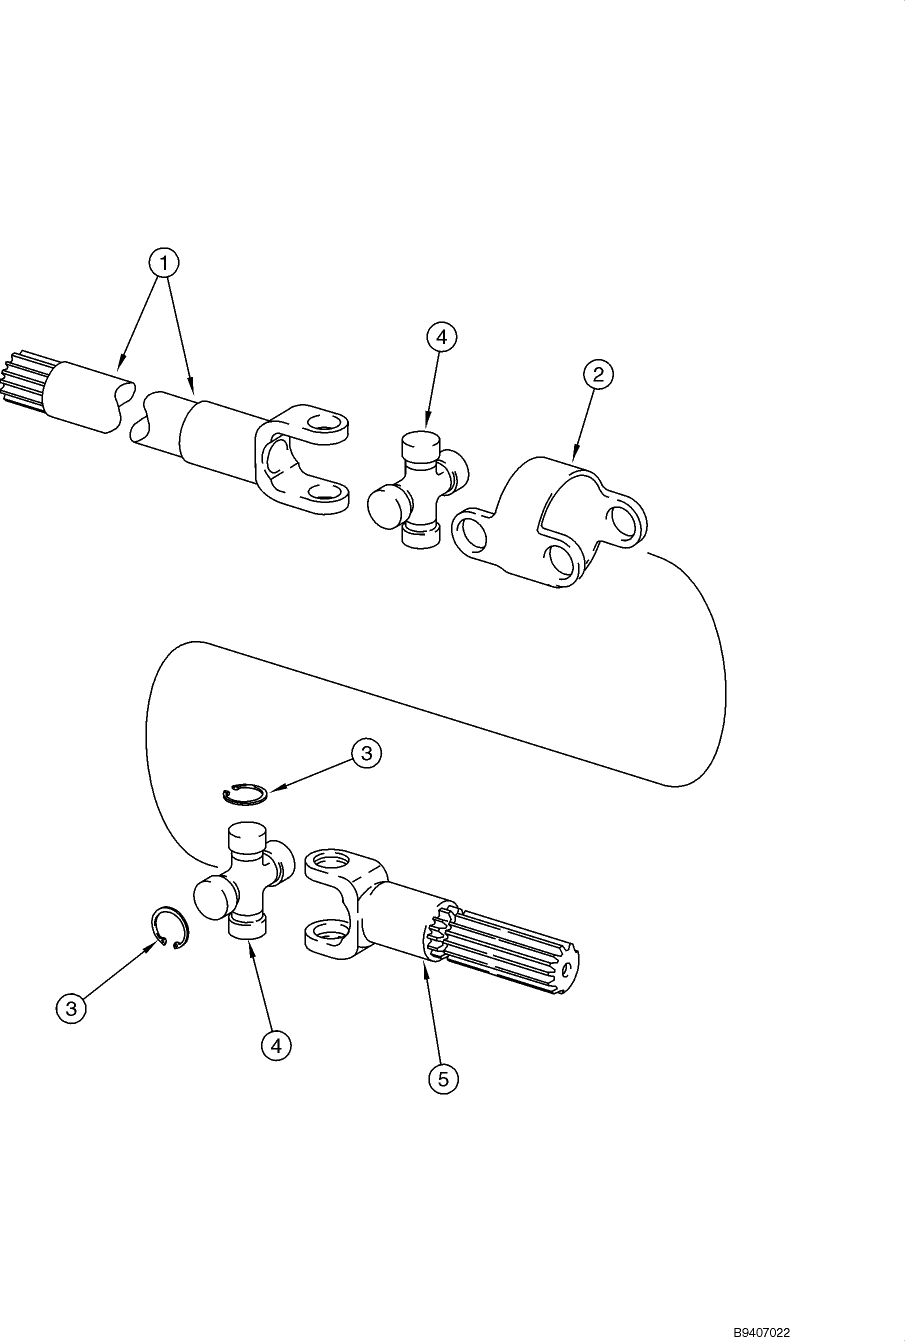 06 -05 AXLE, FRONT DRIVE - SHAFTS, AXLE